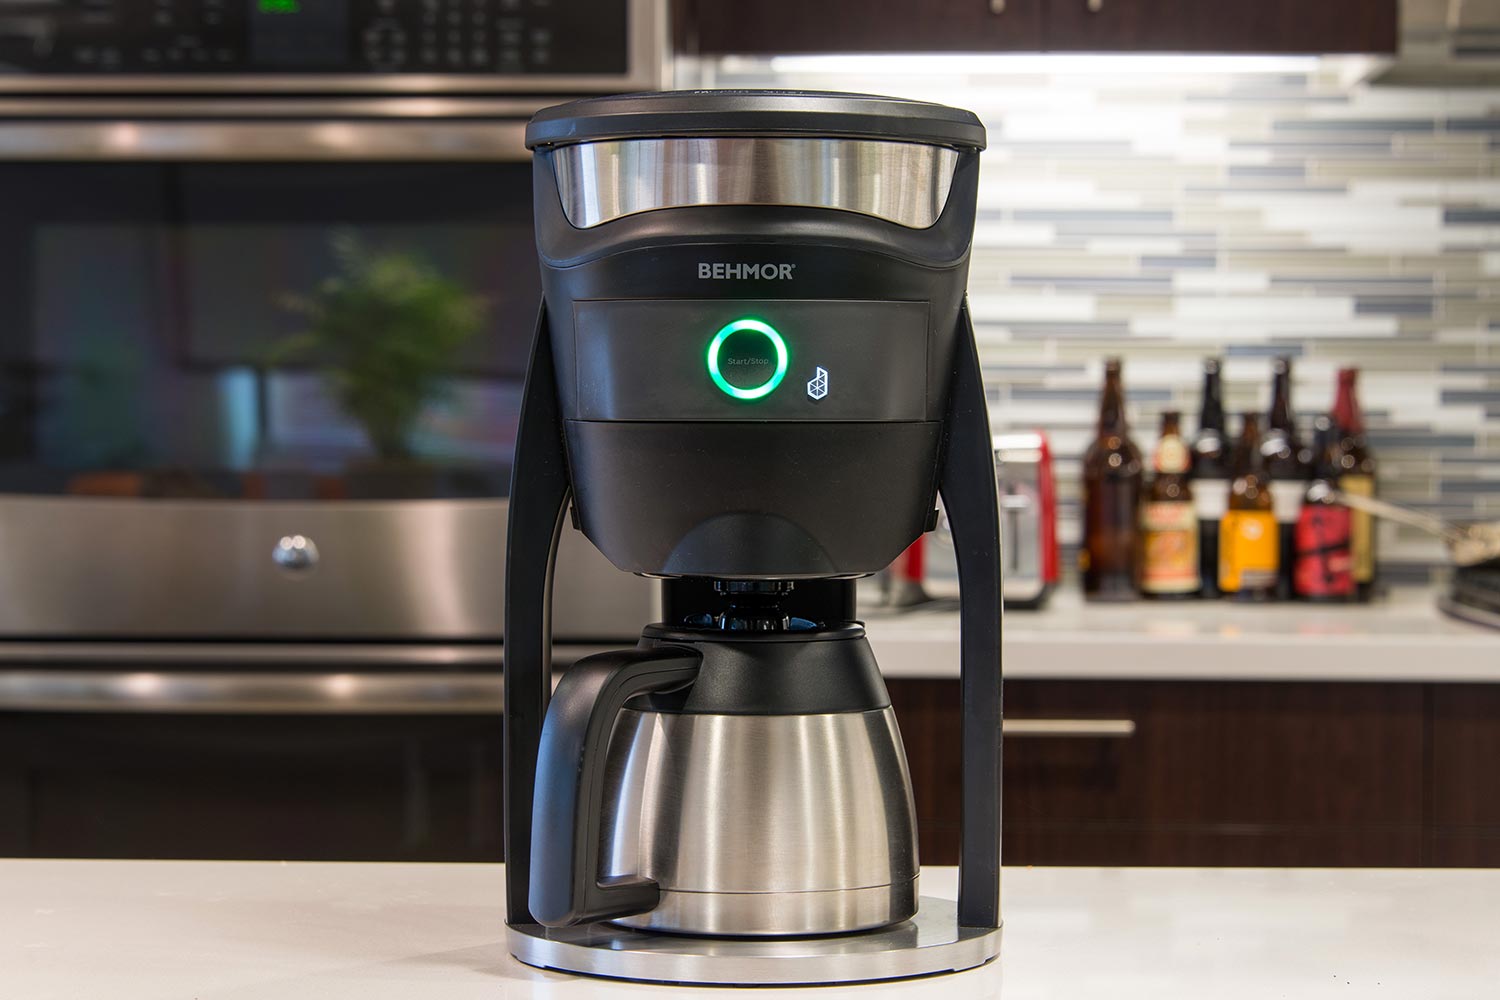 Behmor Brewer Review